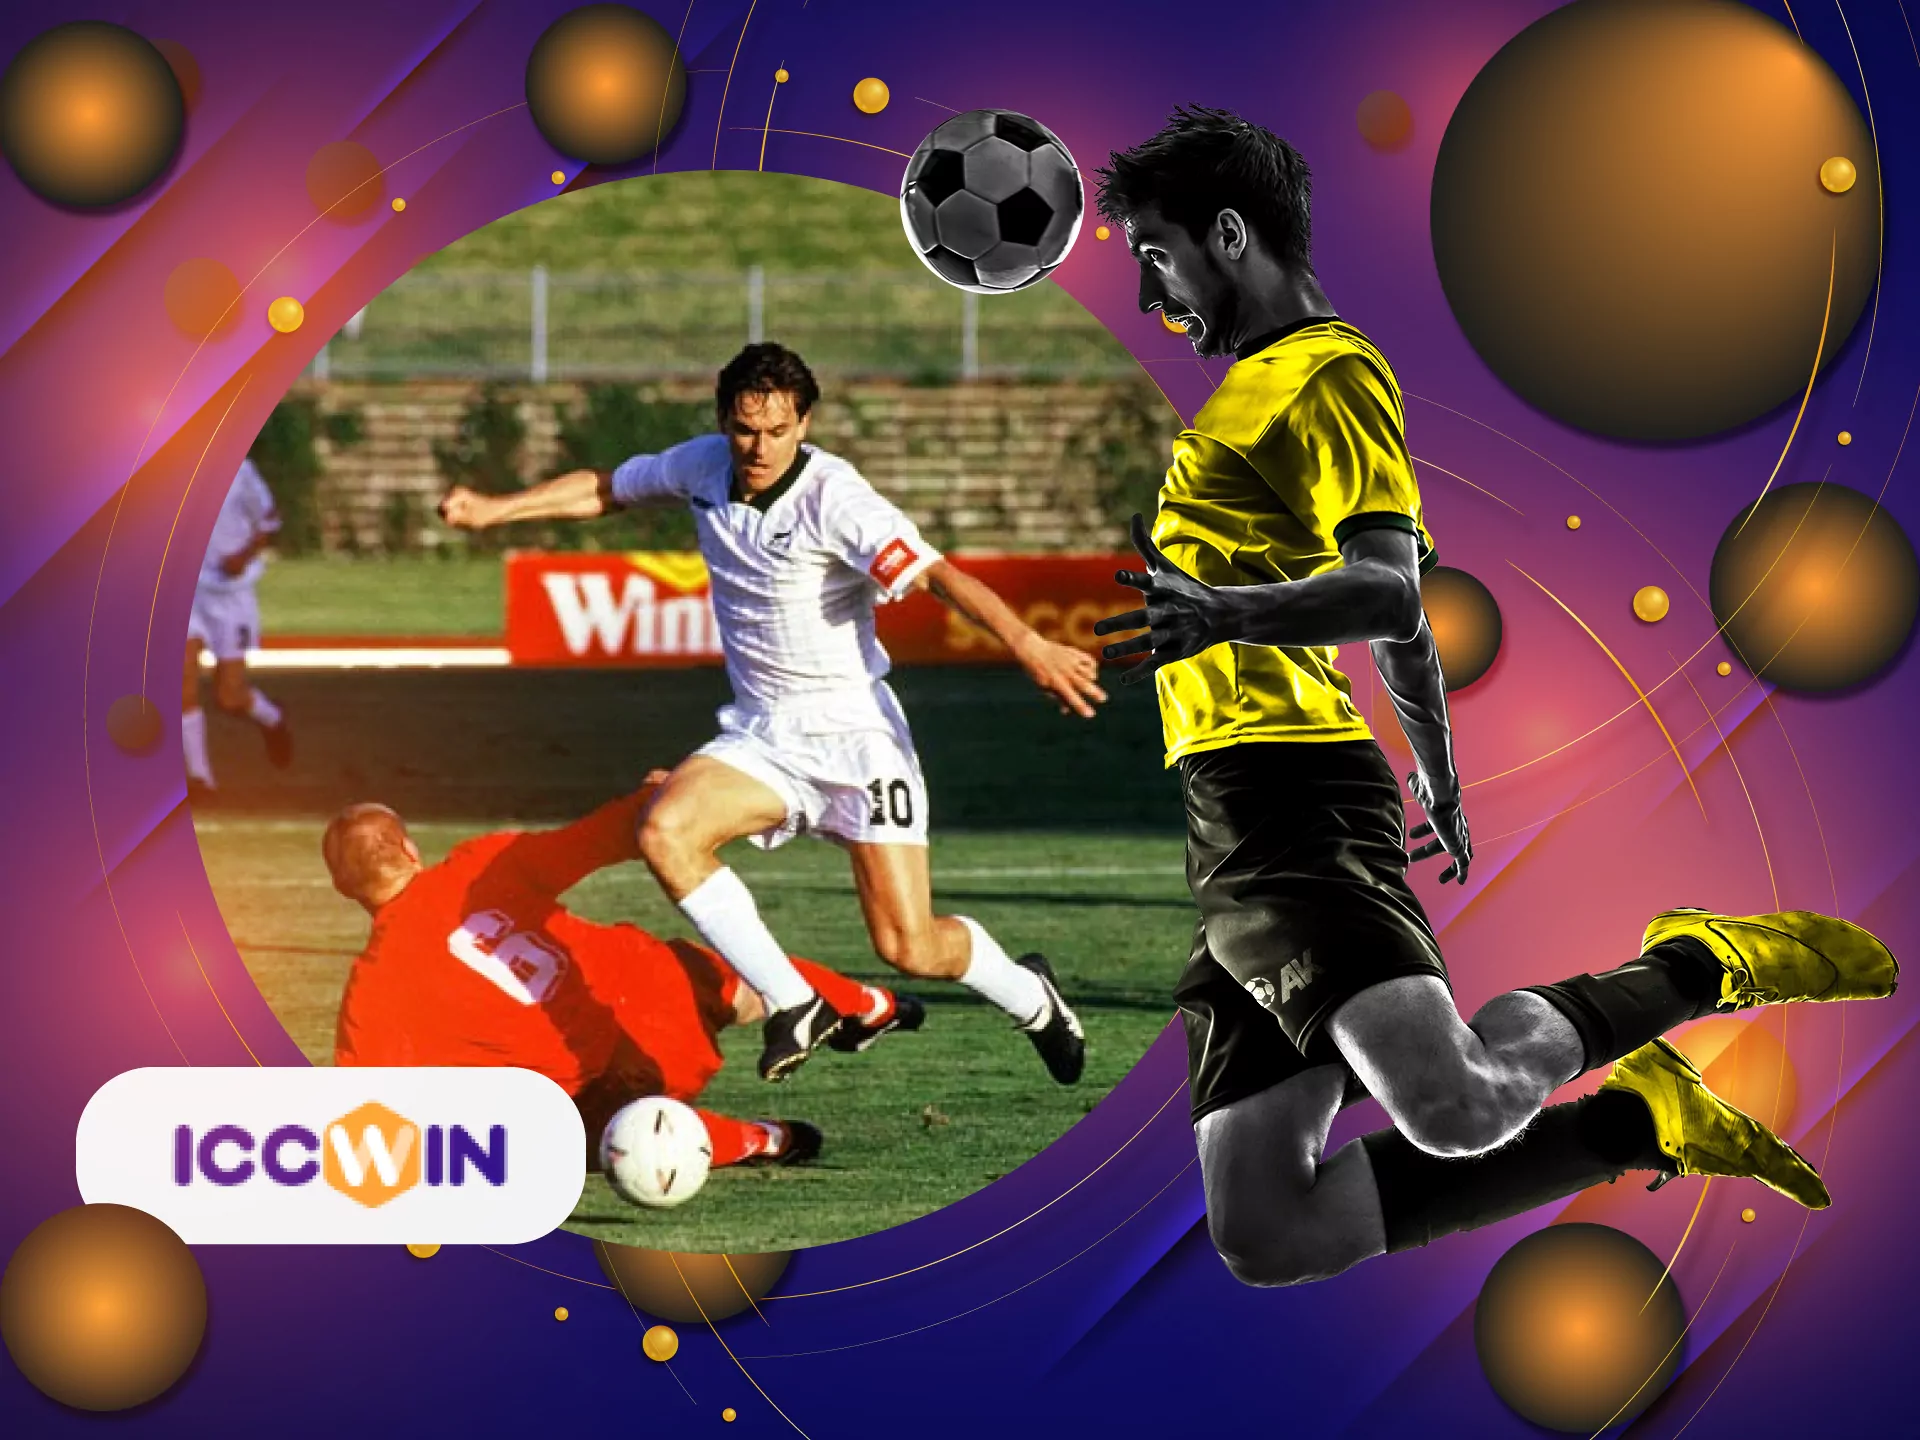 You will find many football leagues in the ICCWIN sportsbook.